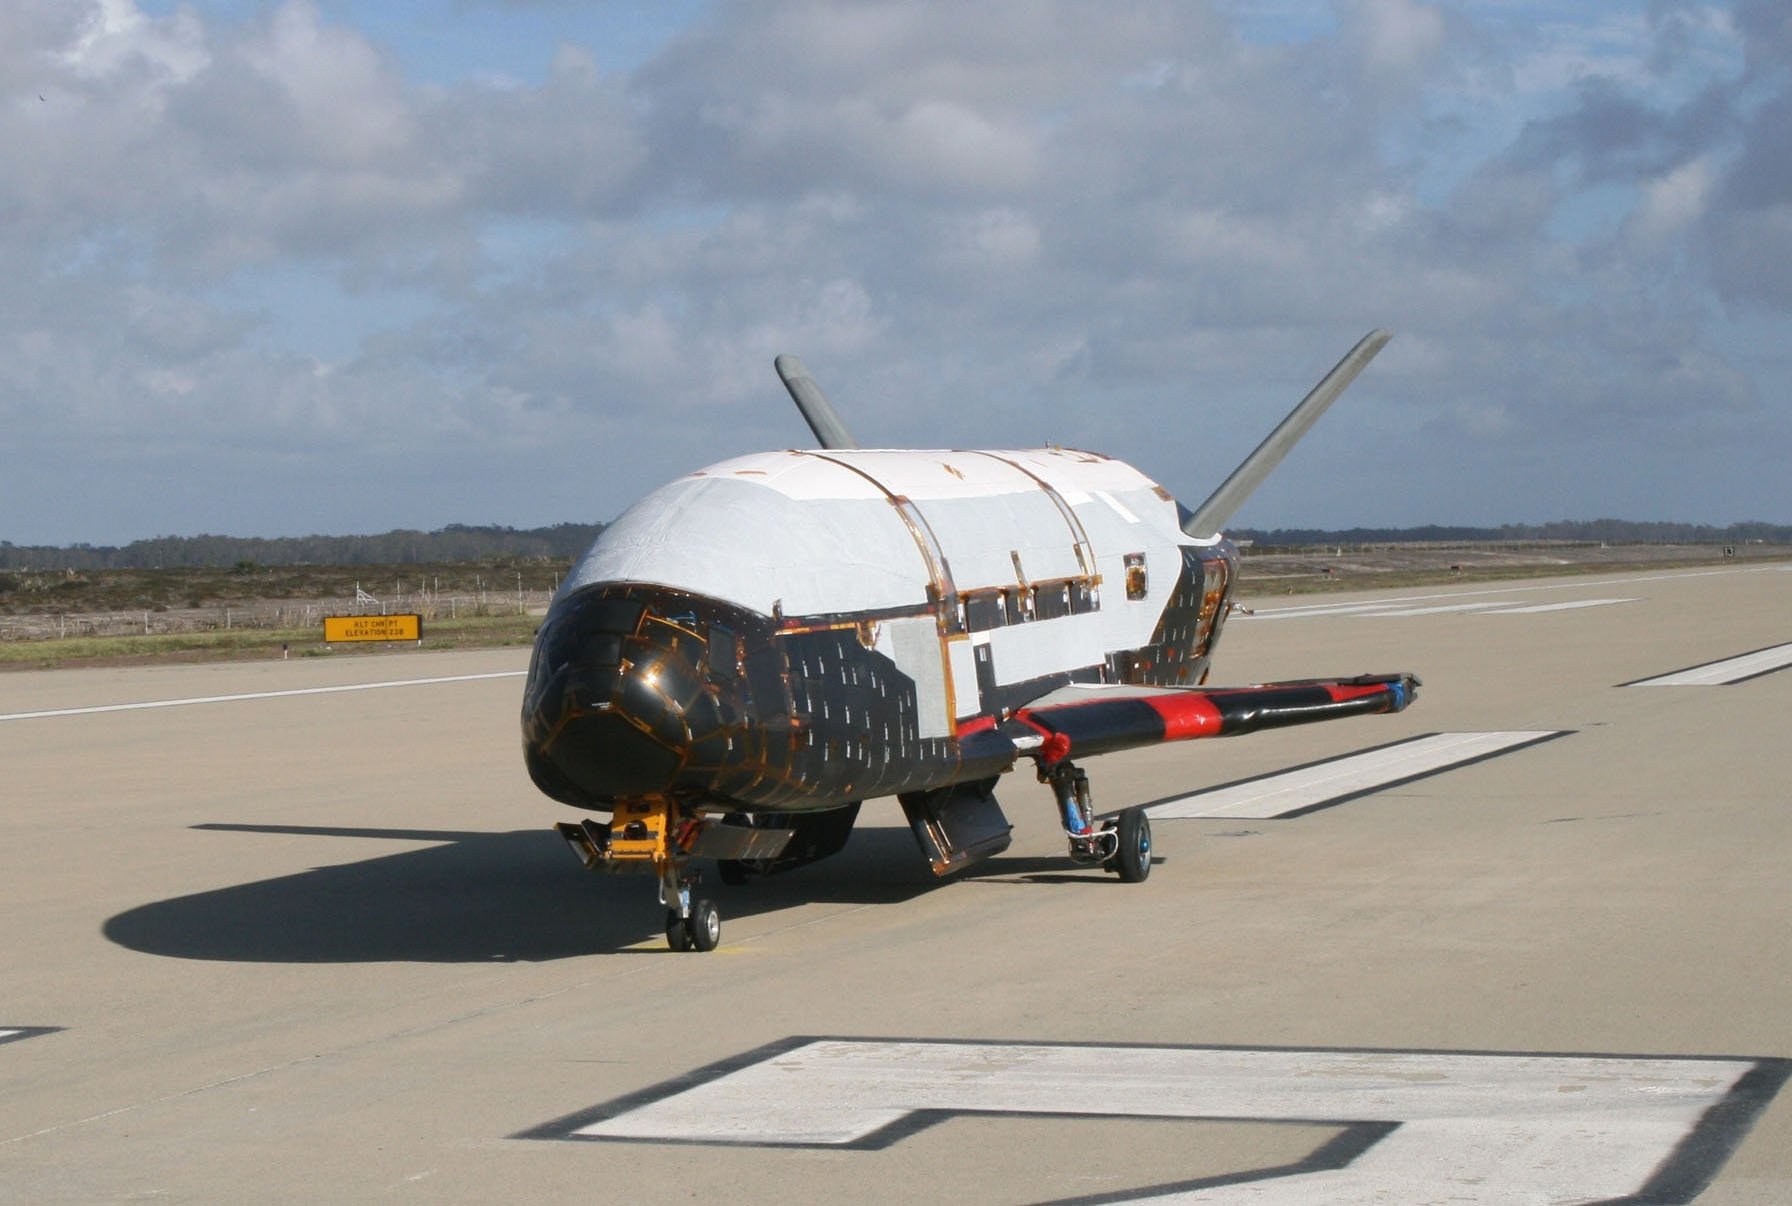 In Orbit two Years, Mysterious U.S. Military Spacecraft Returns to Earth